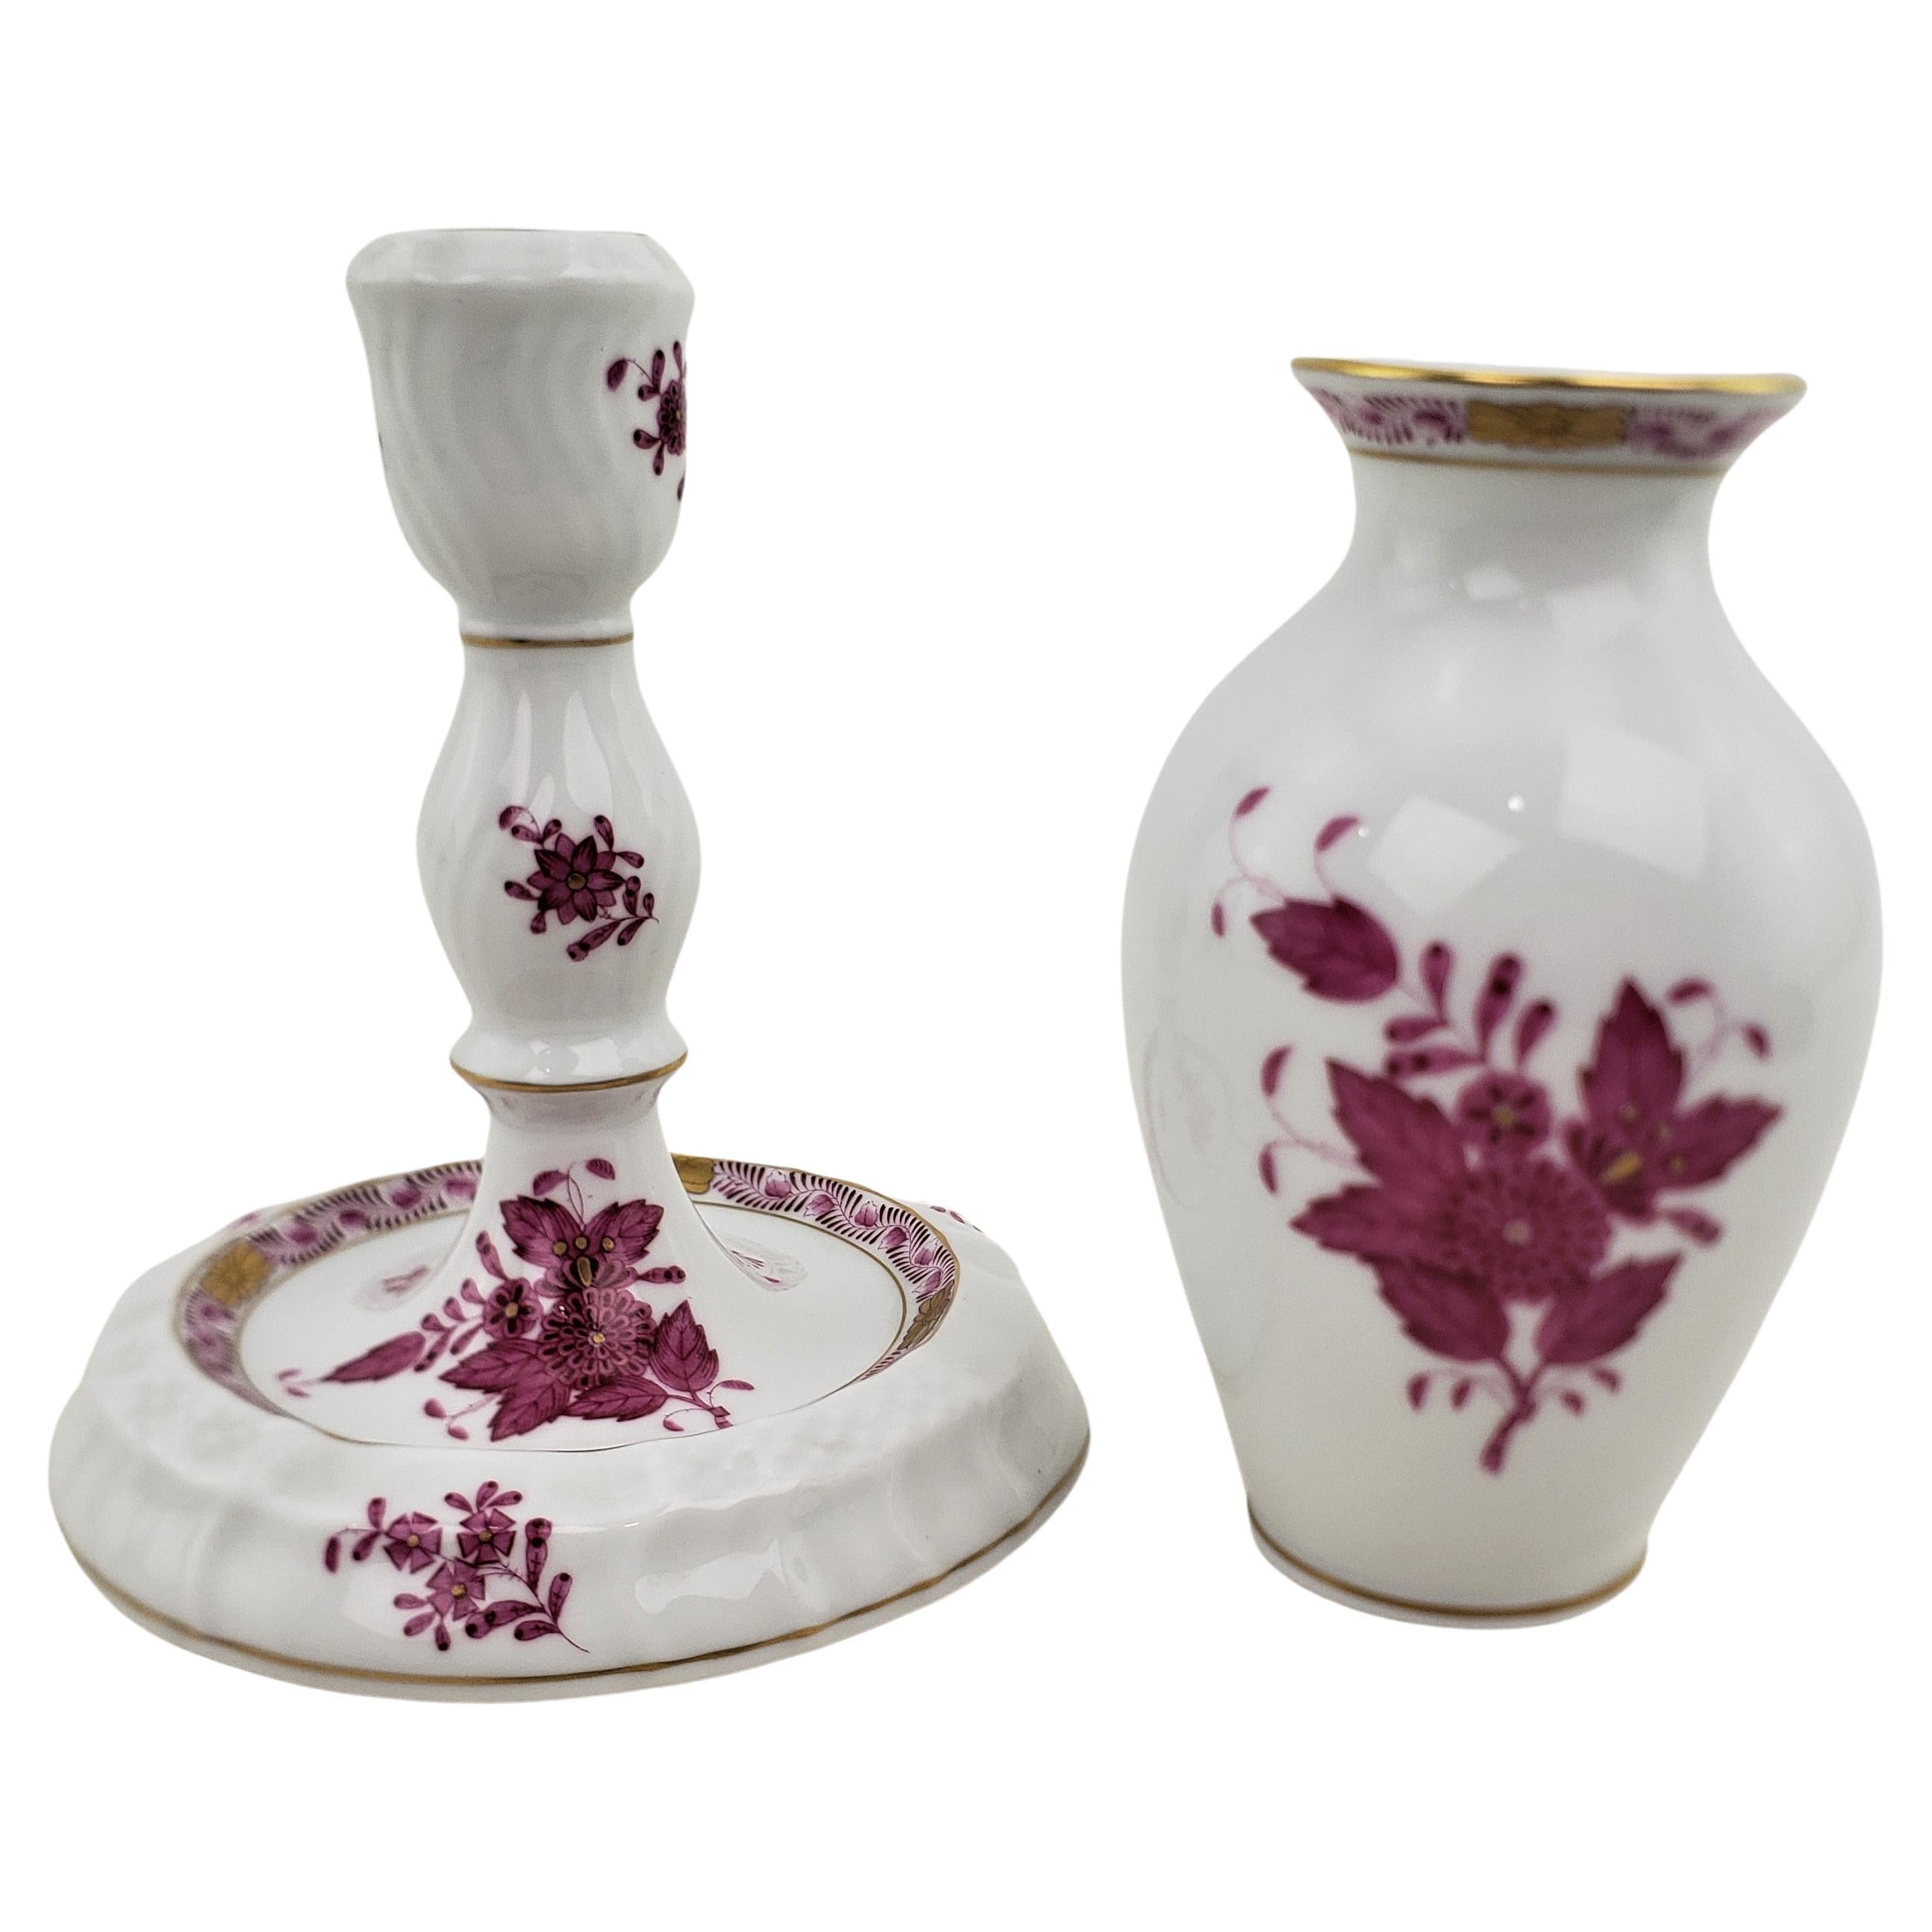 Herend Porcelain Raspberry Chinese Bouquet Candlestick & Vase Pairing